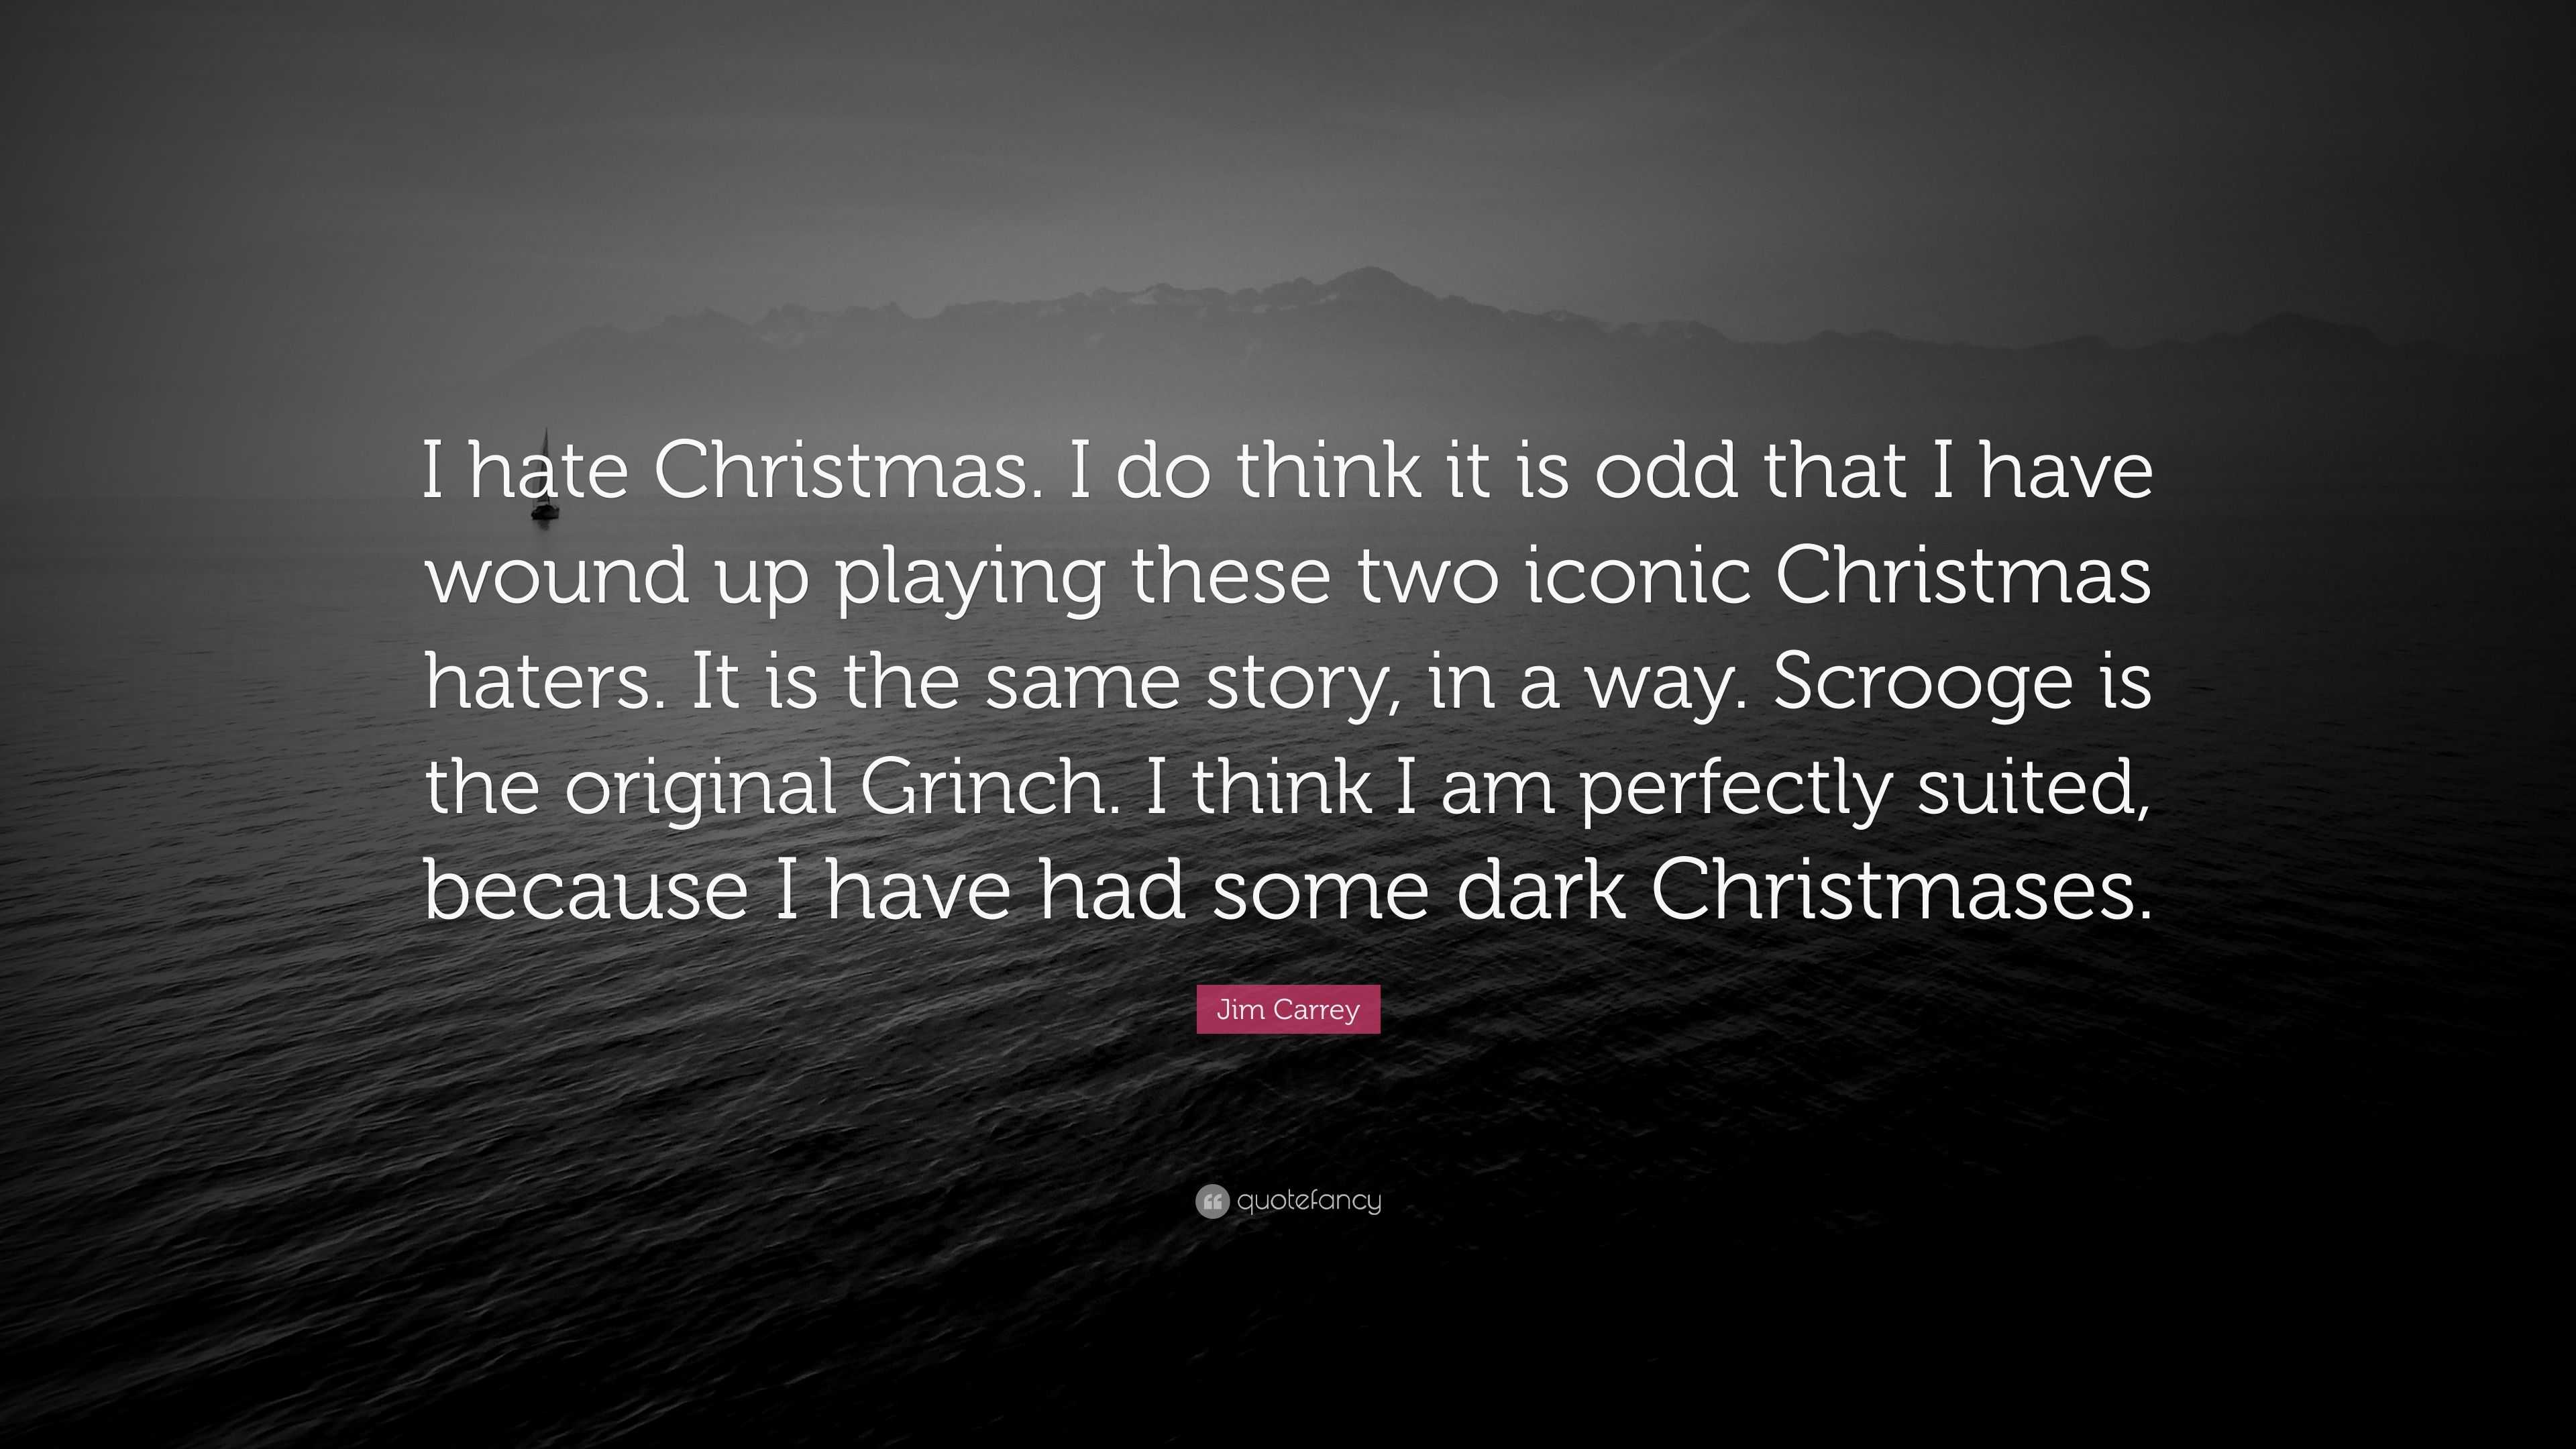 Jim Carrey Quote: “I hate Christmas. I do think it is odd that I have ...